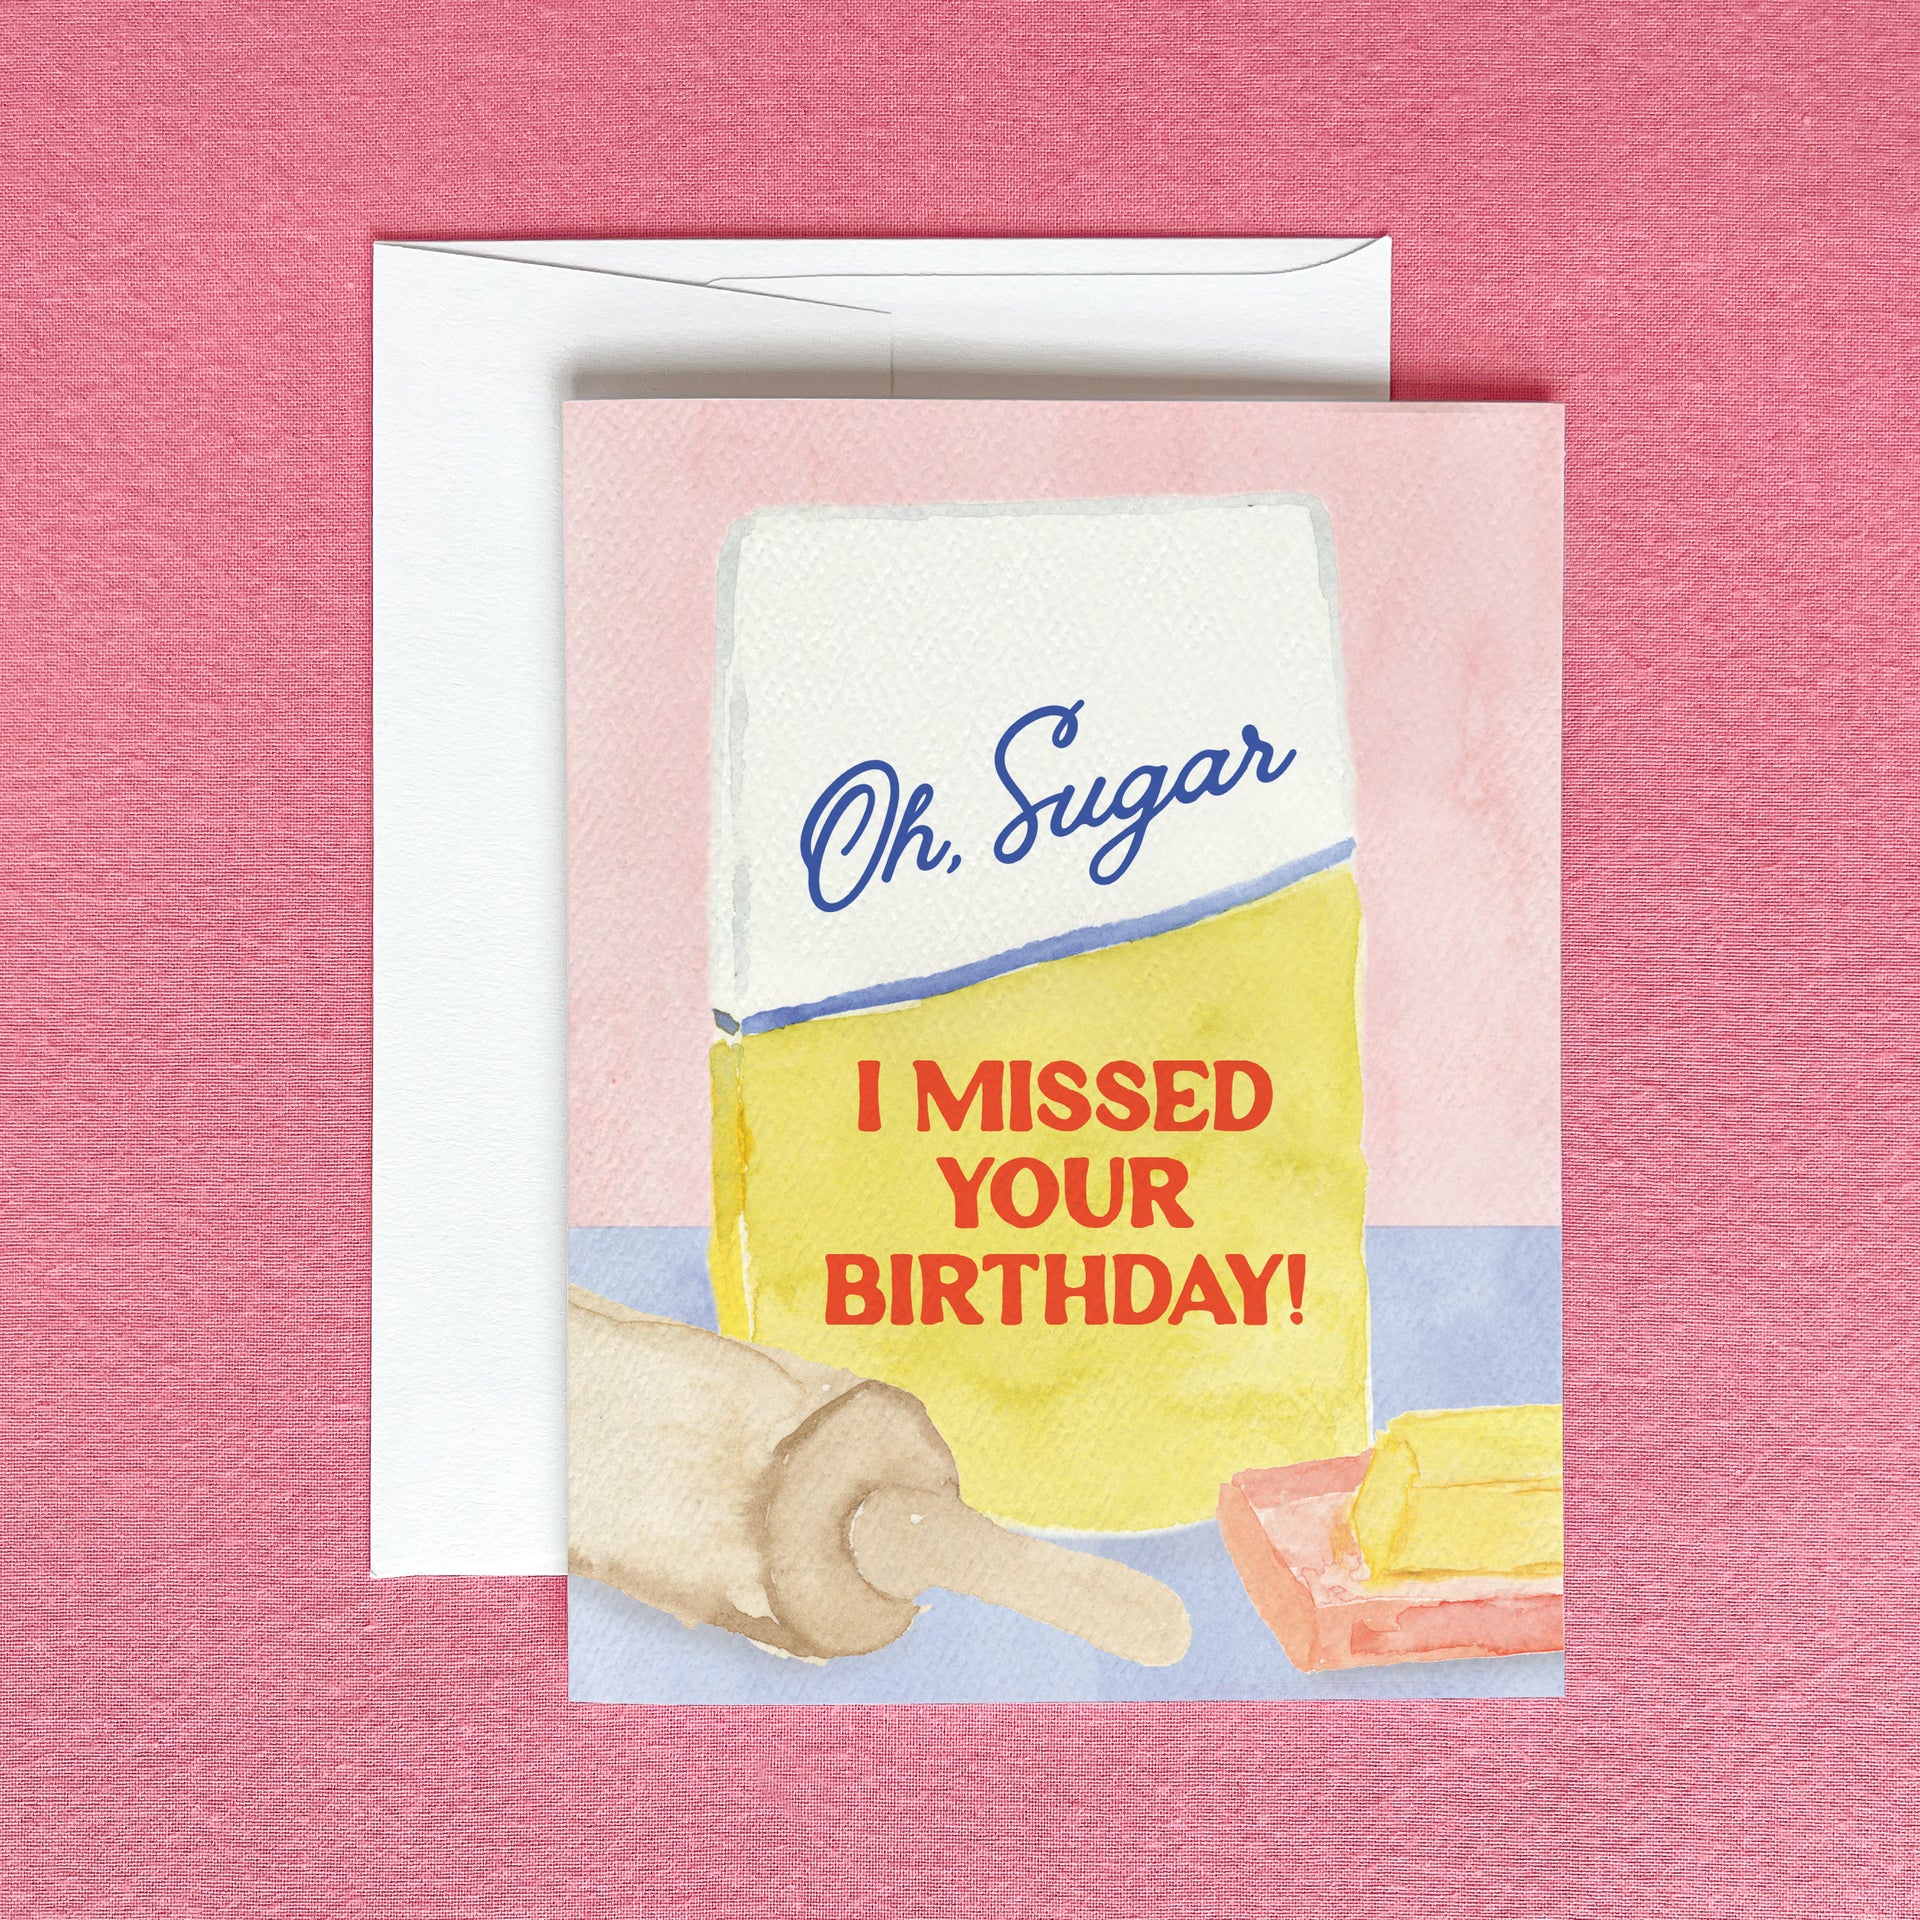 Oh Sugar I Missed Your Birthday Belated Birthday Card by Gert and Co